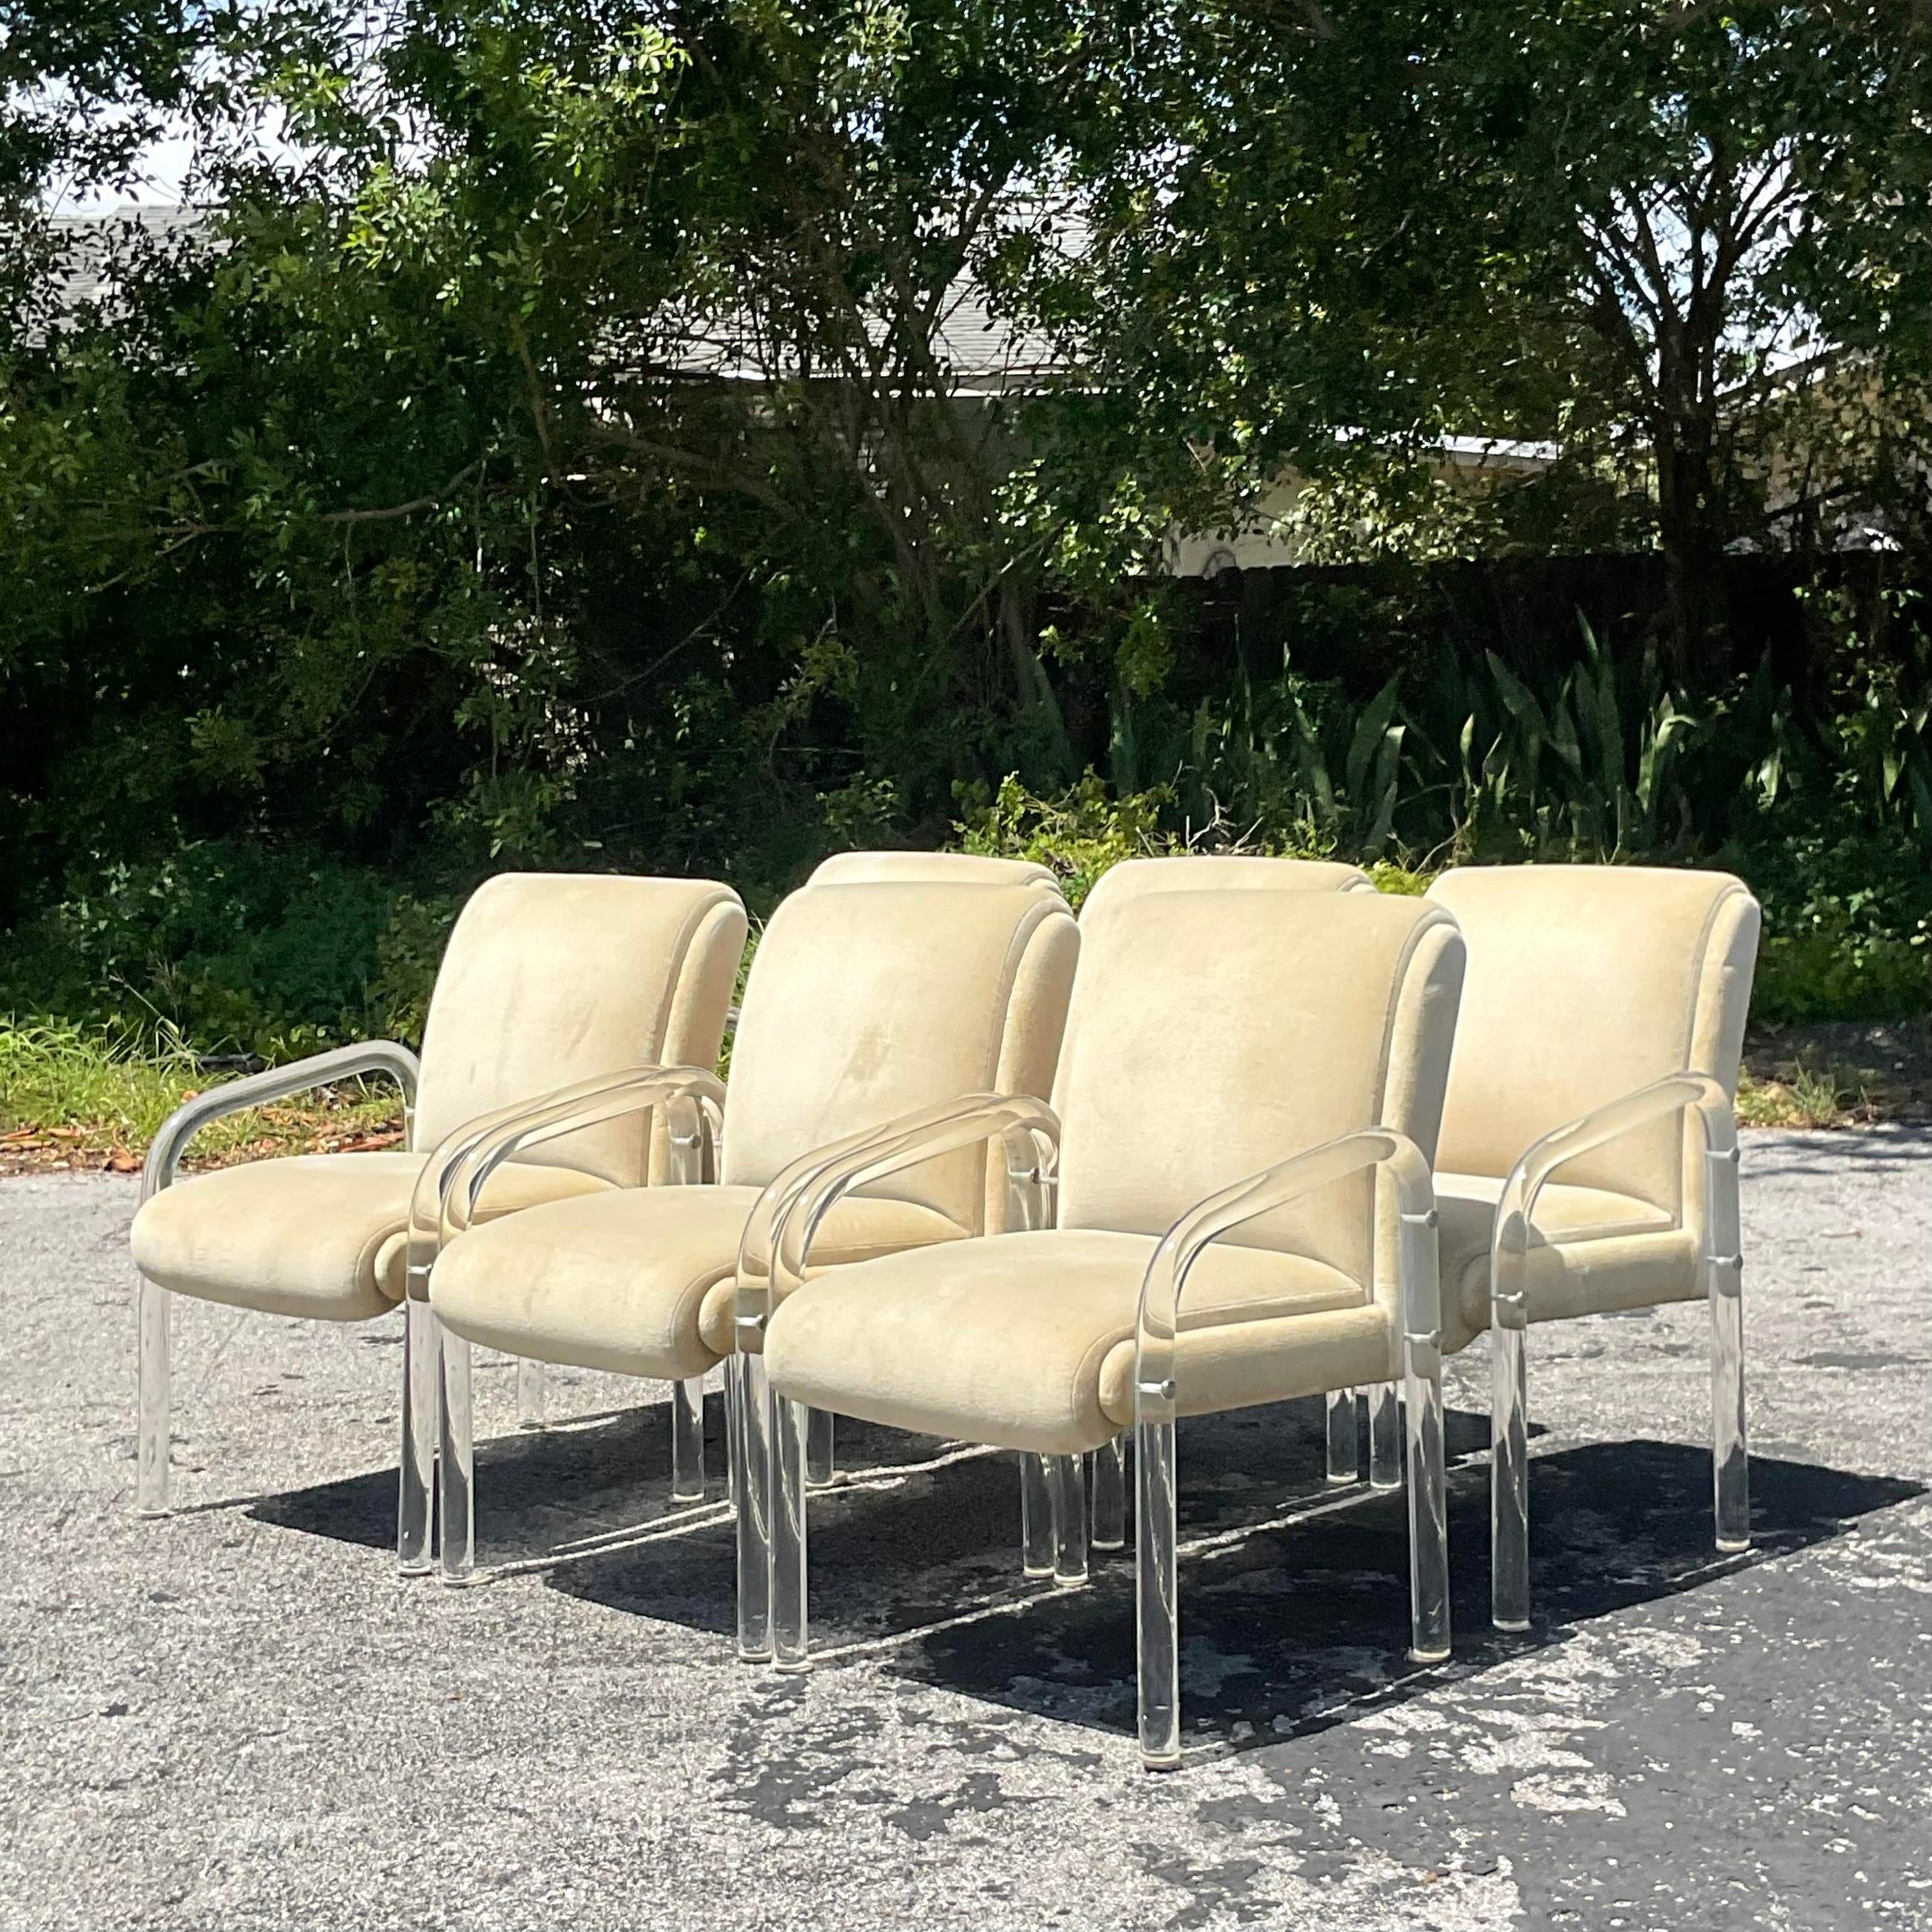 American Vintage Contemporary Lucite Dining Chairs After Pace - Set of 6